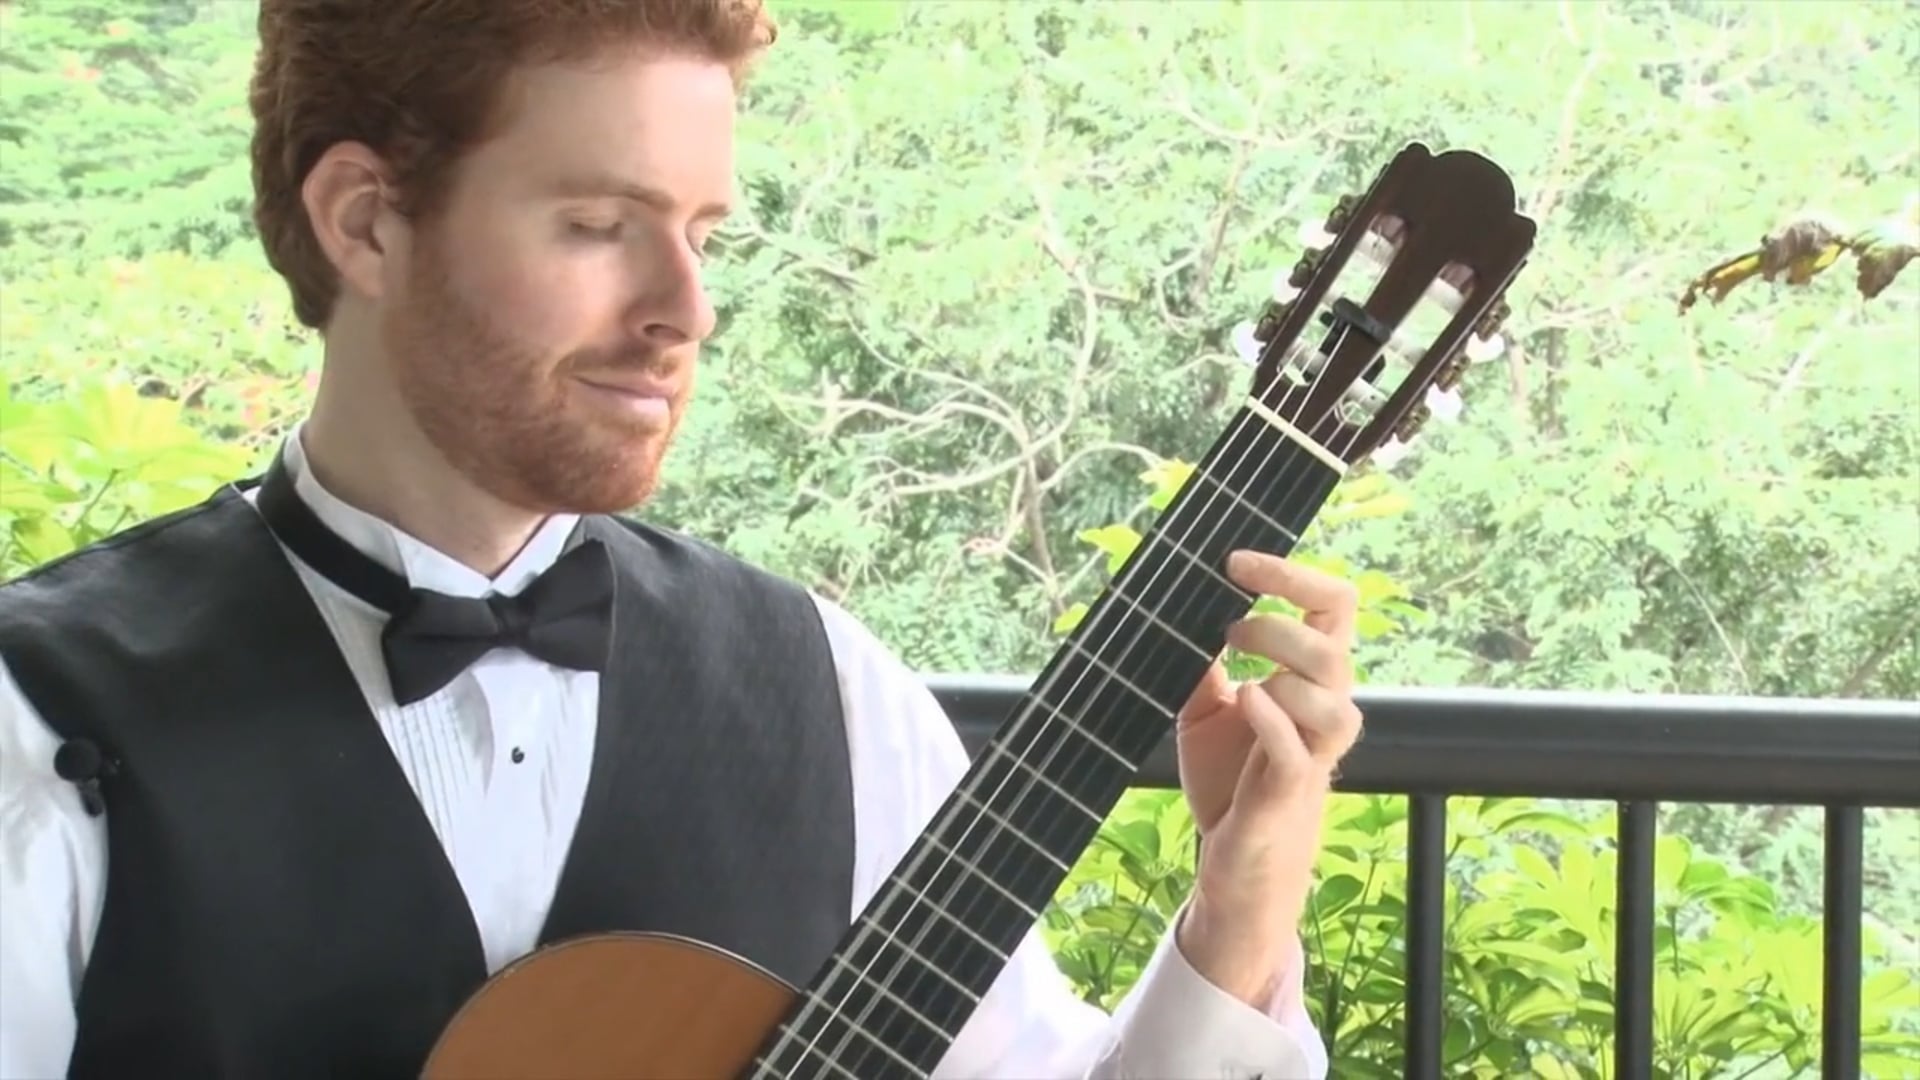 Promotional video thumbnail 1 for Stephan Kane Classical Guitarist